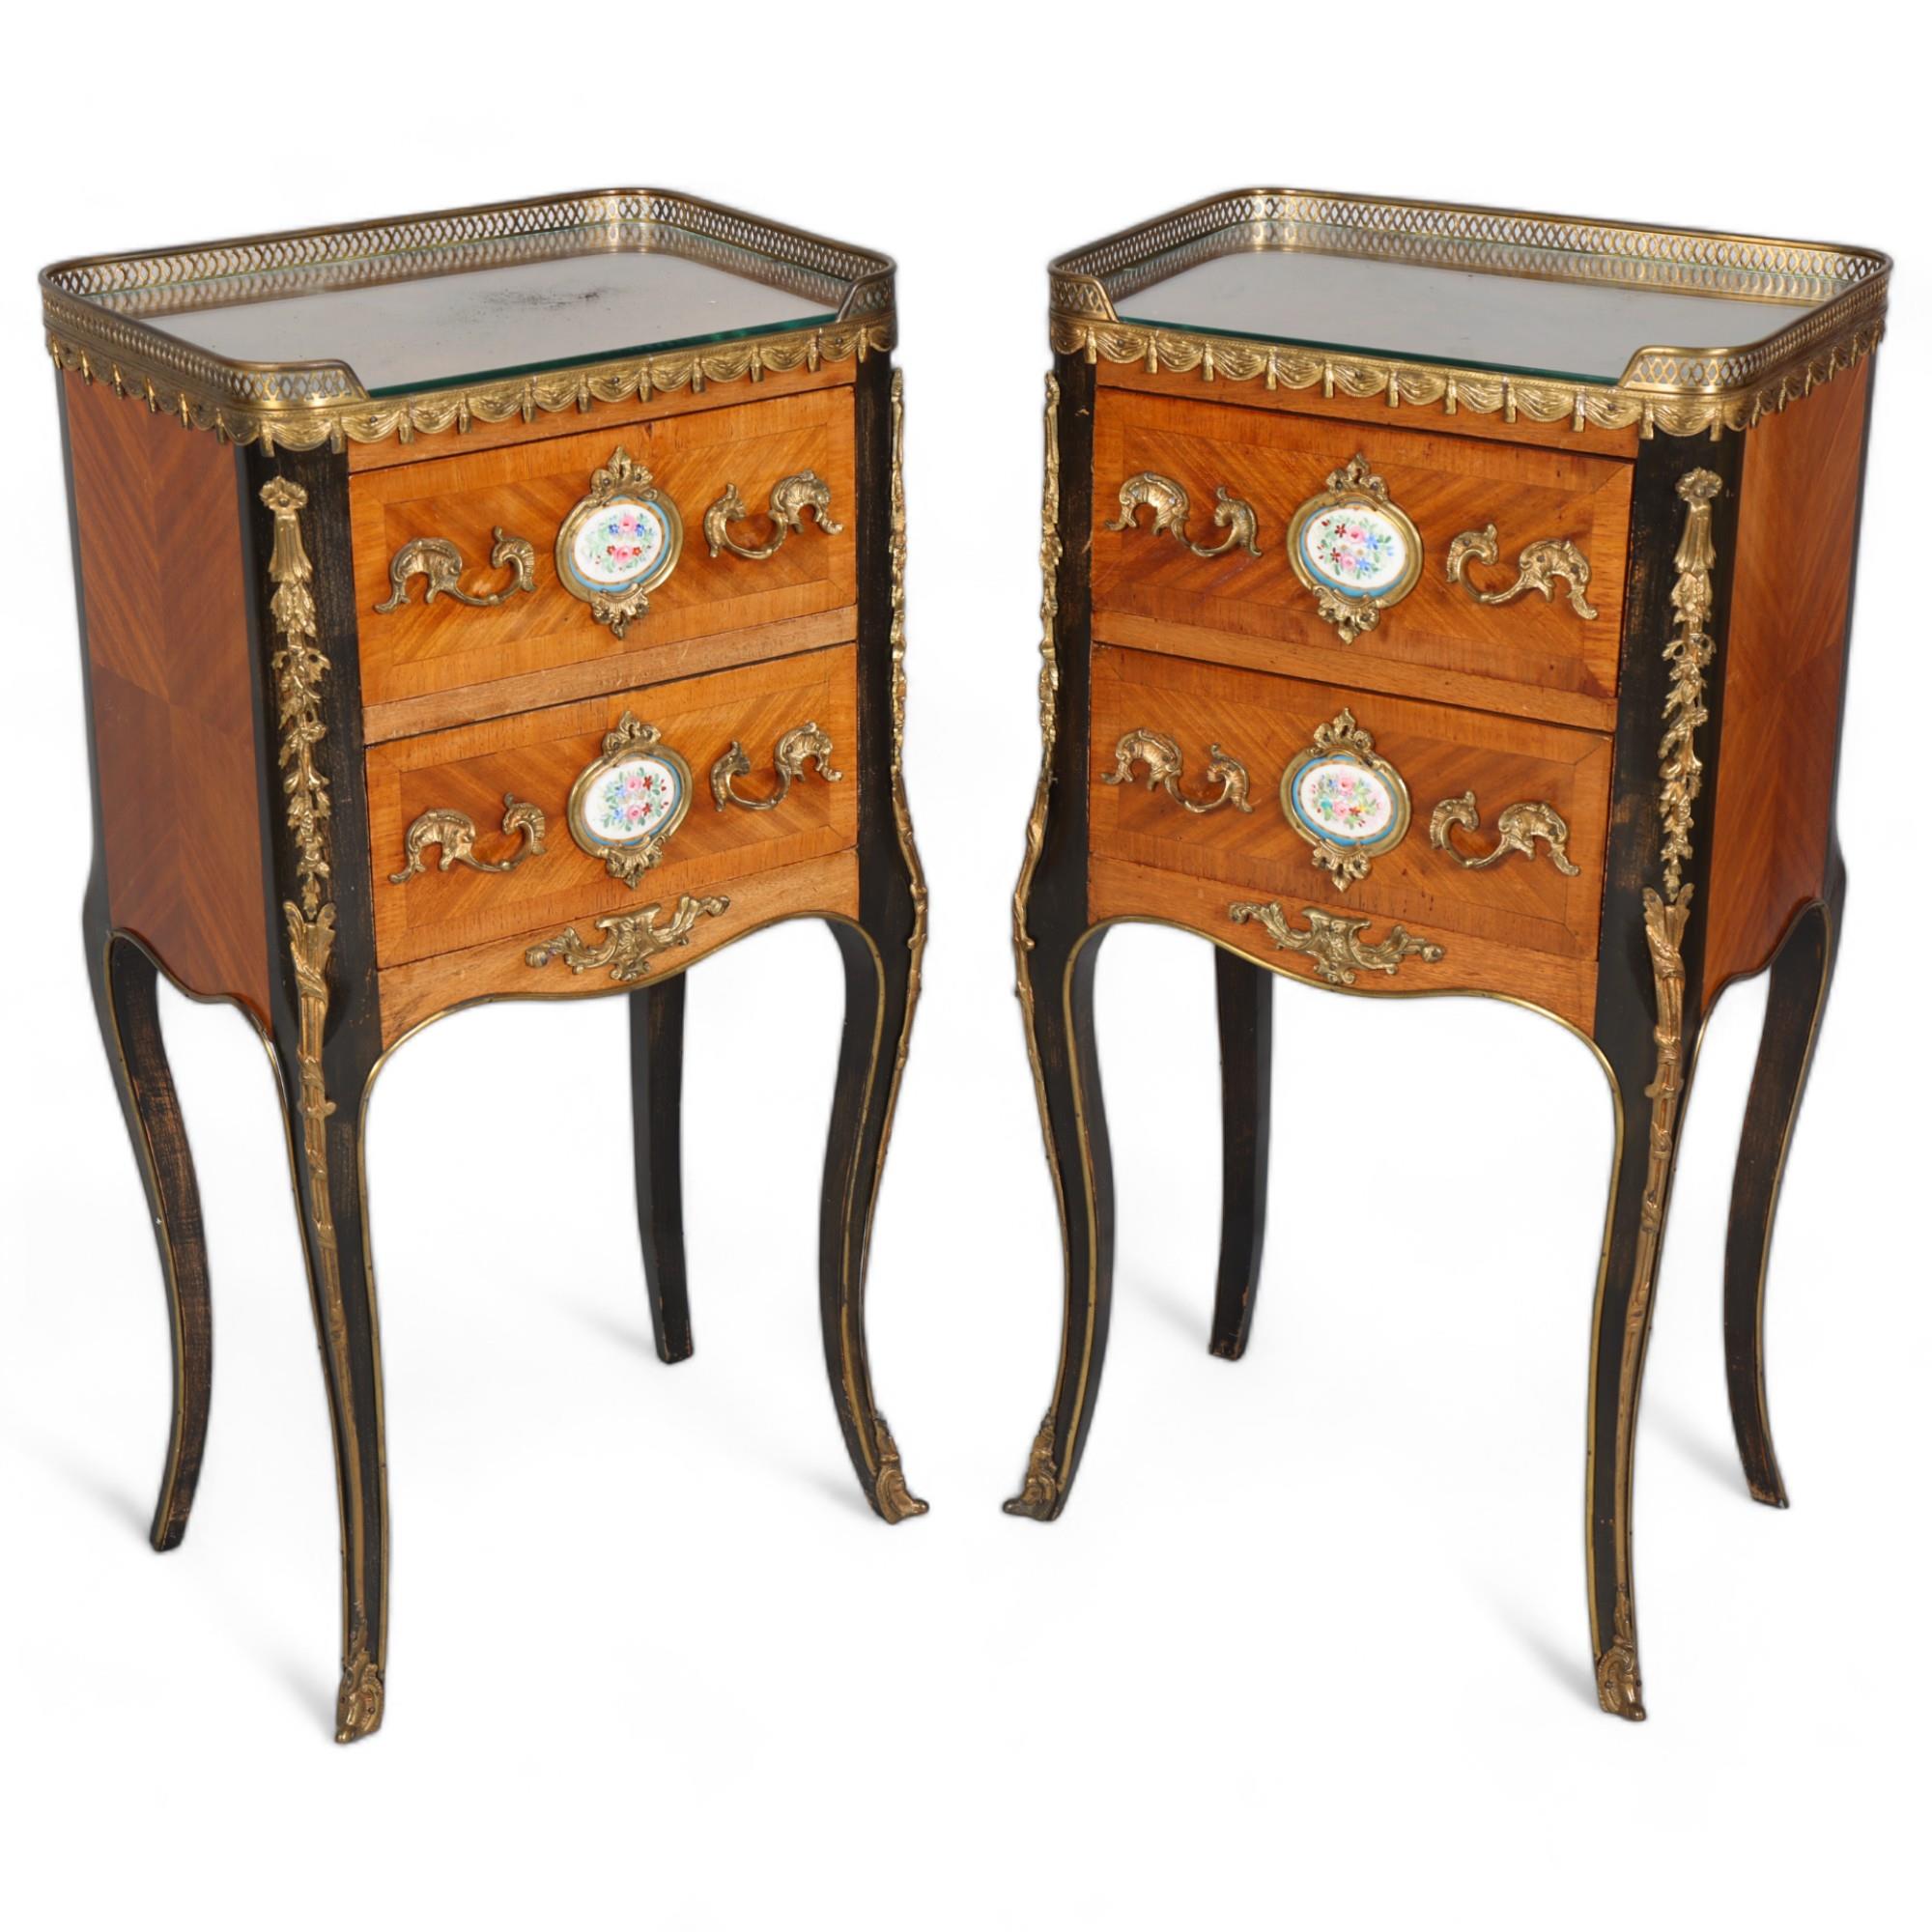 A pair of French walnut 2-drawer bedside chests, inset porcelain plaques to the drawer fronts, brass